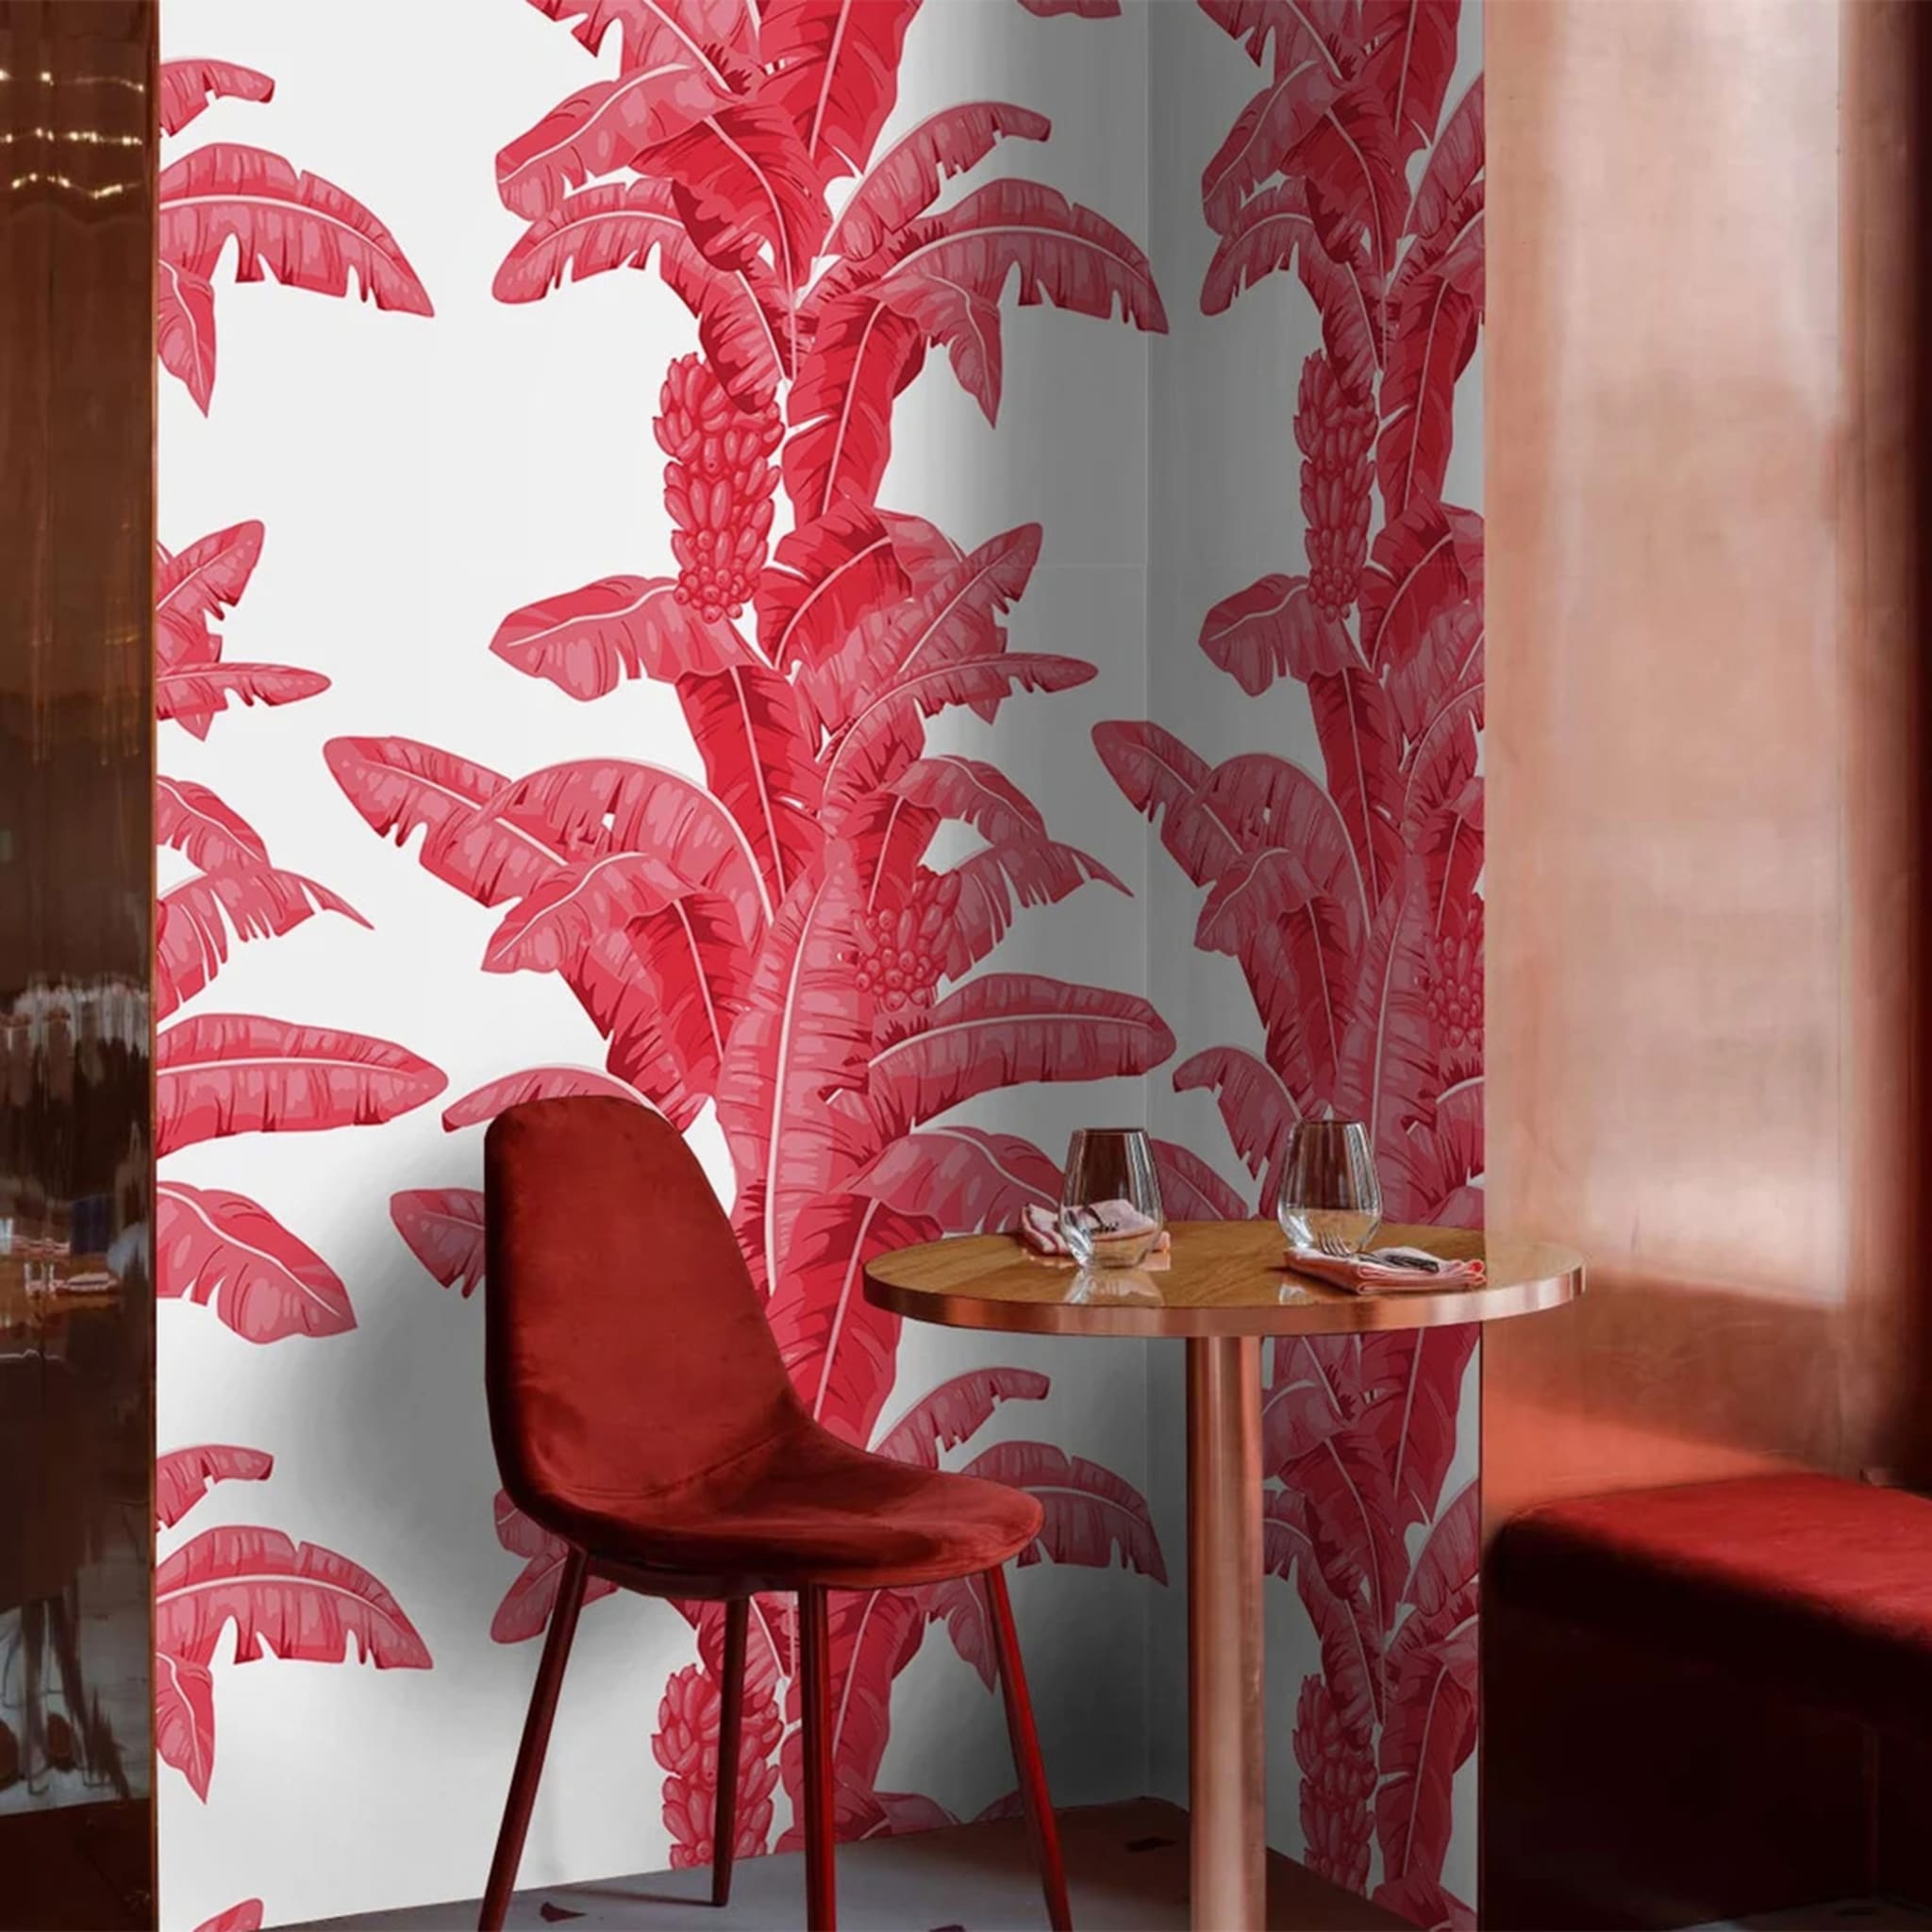 Tropical Palm Leaf Wallpaper in Red and White - Alternative view 2